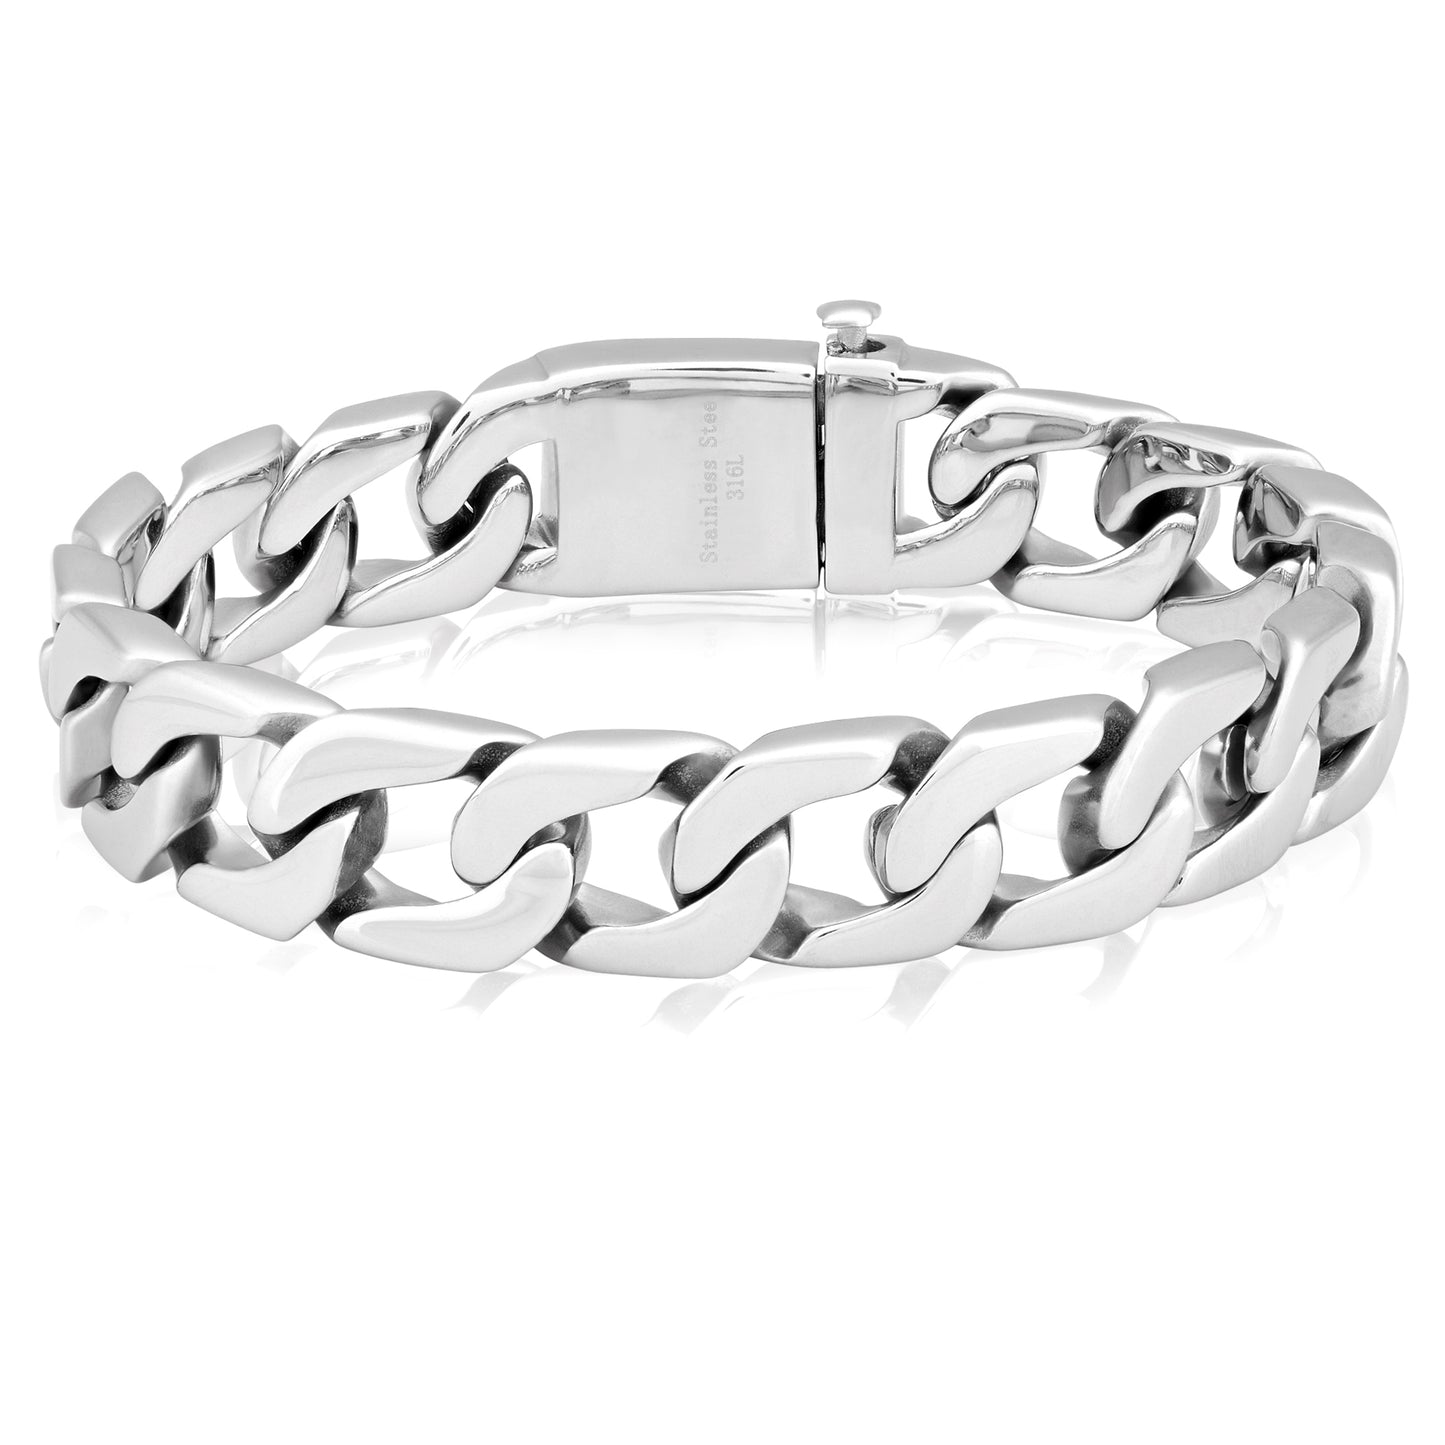 Men's Stainless Steel Polished Box Clasp Curb Chain Bracelet (16mm) - 8.5"